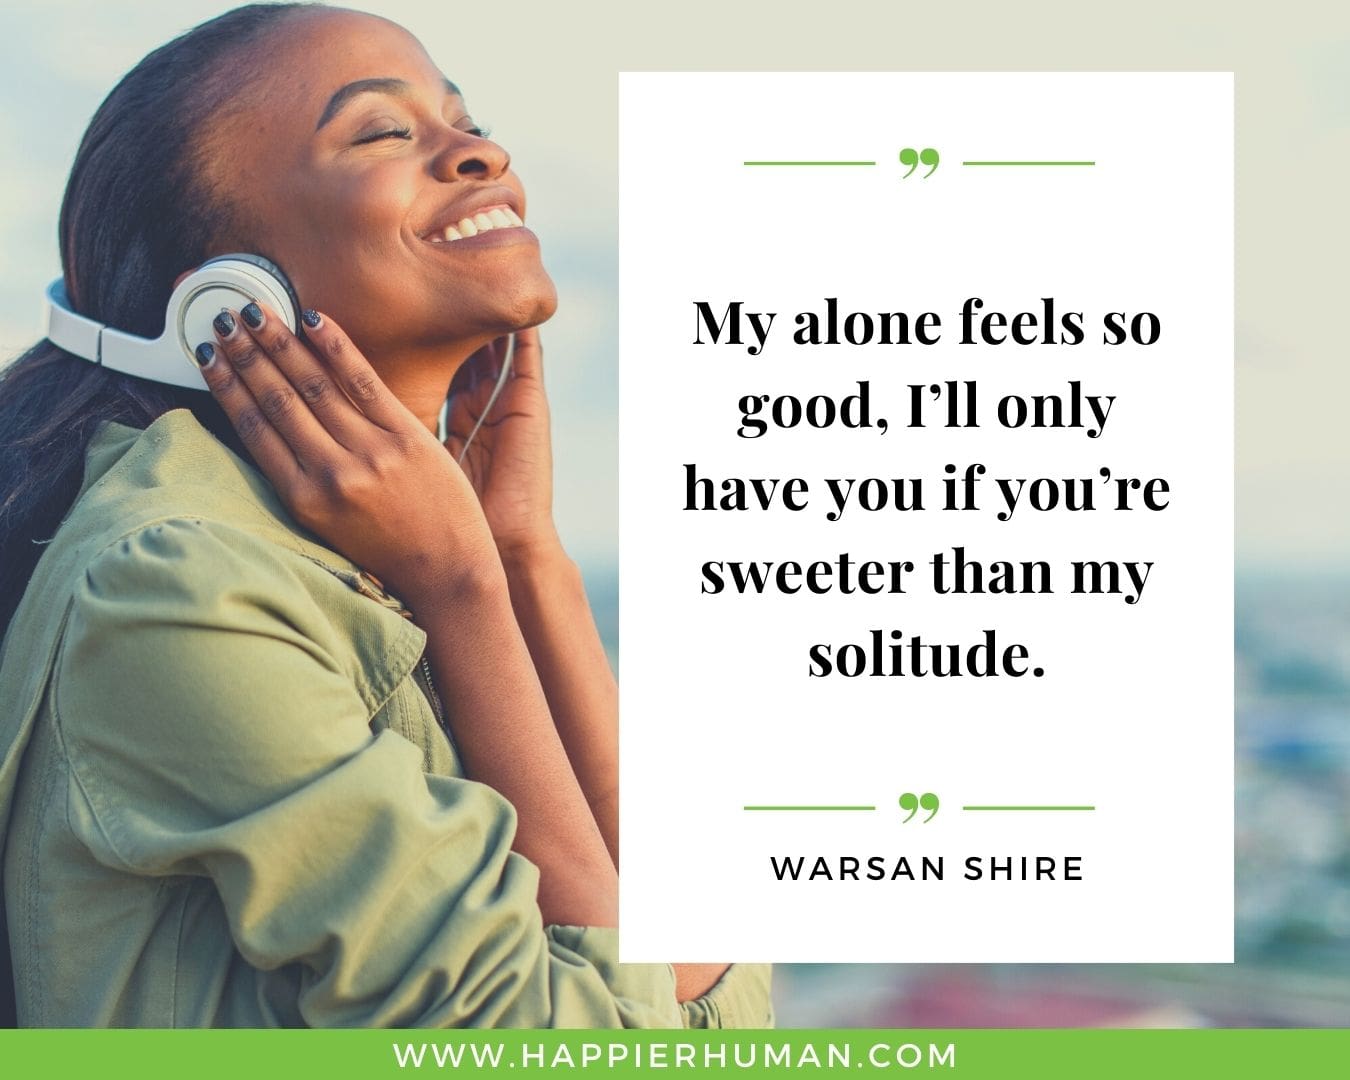 Introvert Quotes - “My alone feels so good, I’ll only have you if you’re sweeter than my solitude.” – Warsan Shire